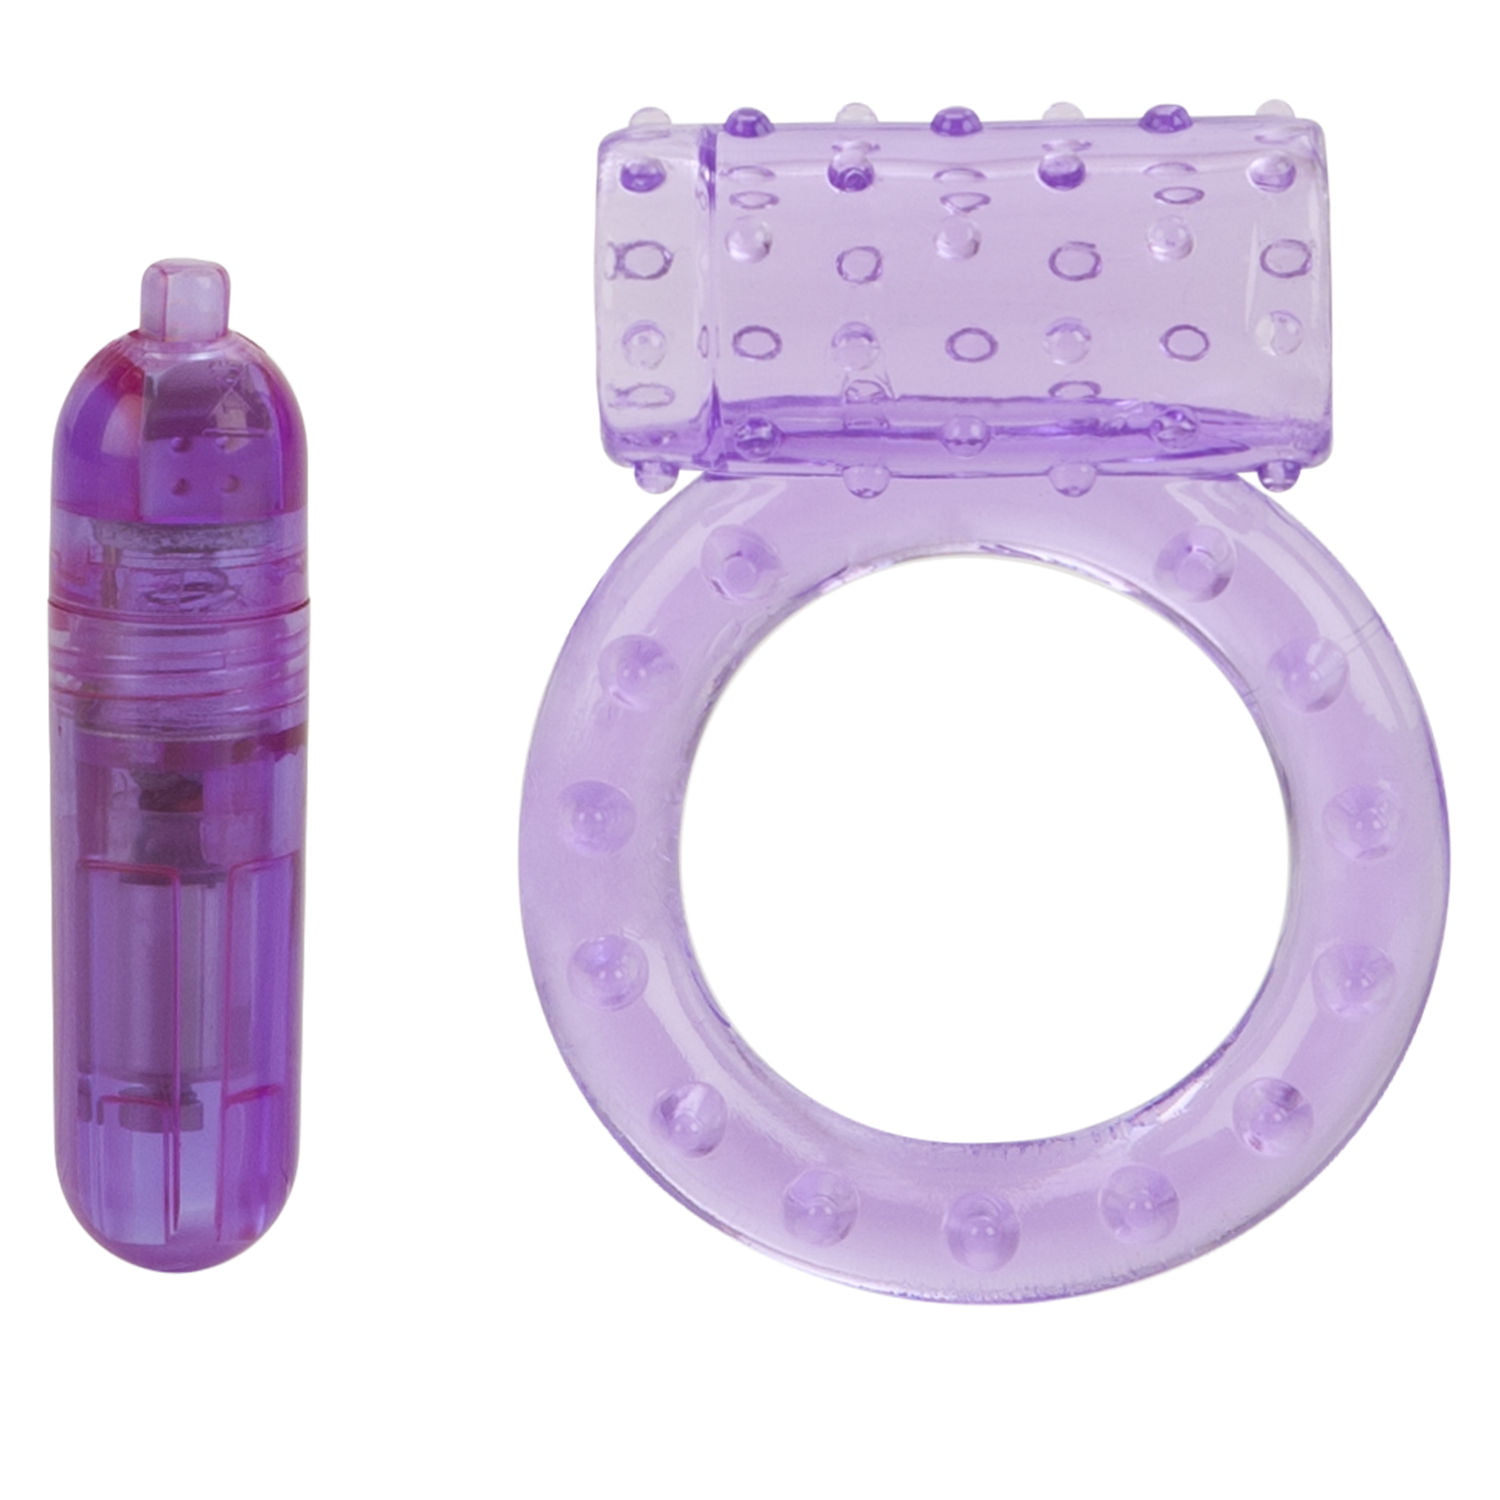 CalExotics One Touch Activated Stretchy Nubby Vibrating Erection Ring for  Couples - Purple 